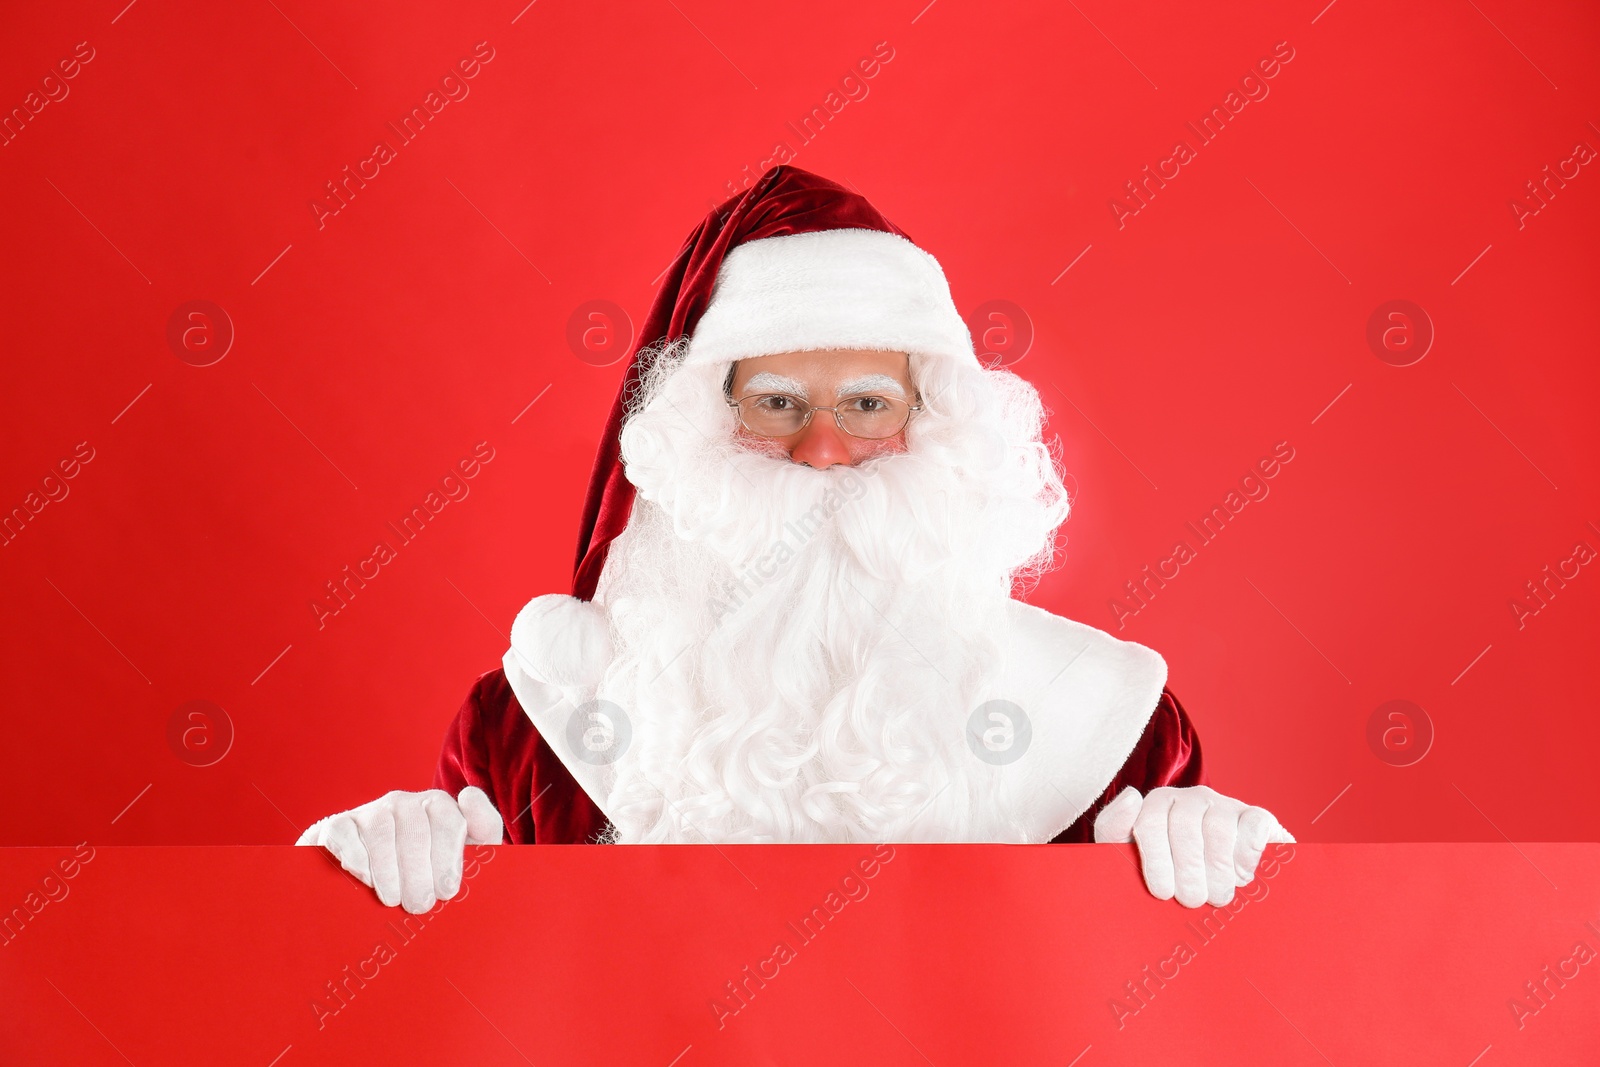 Photo of Santa Claus holding empty banner on red background